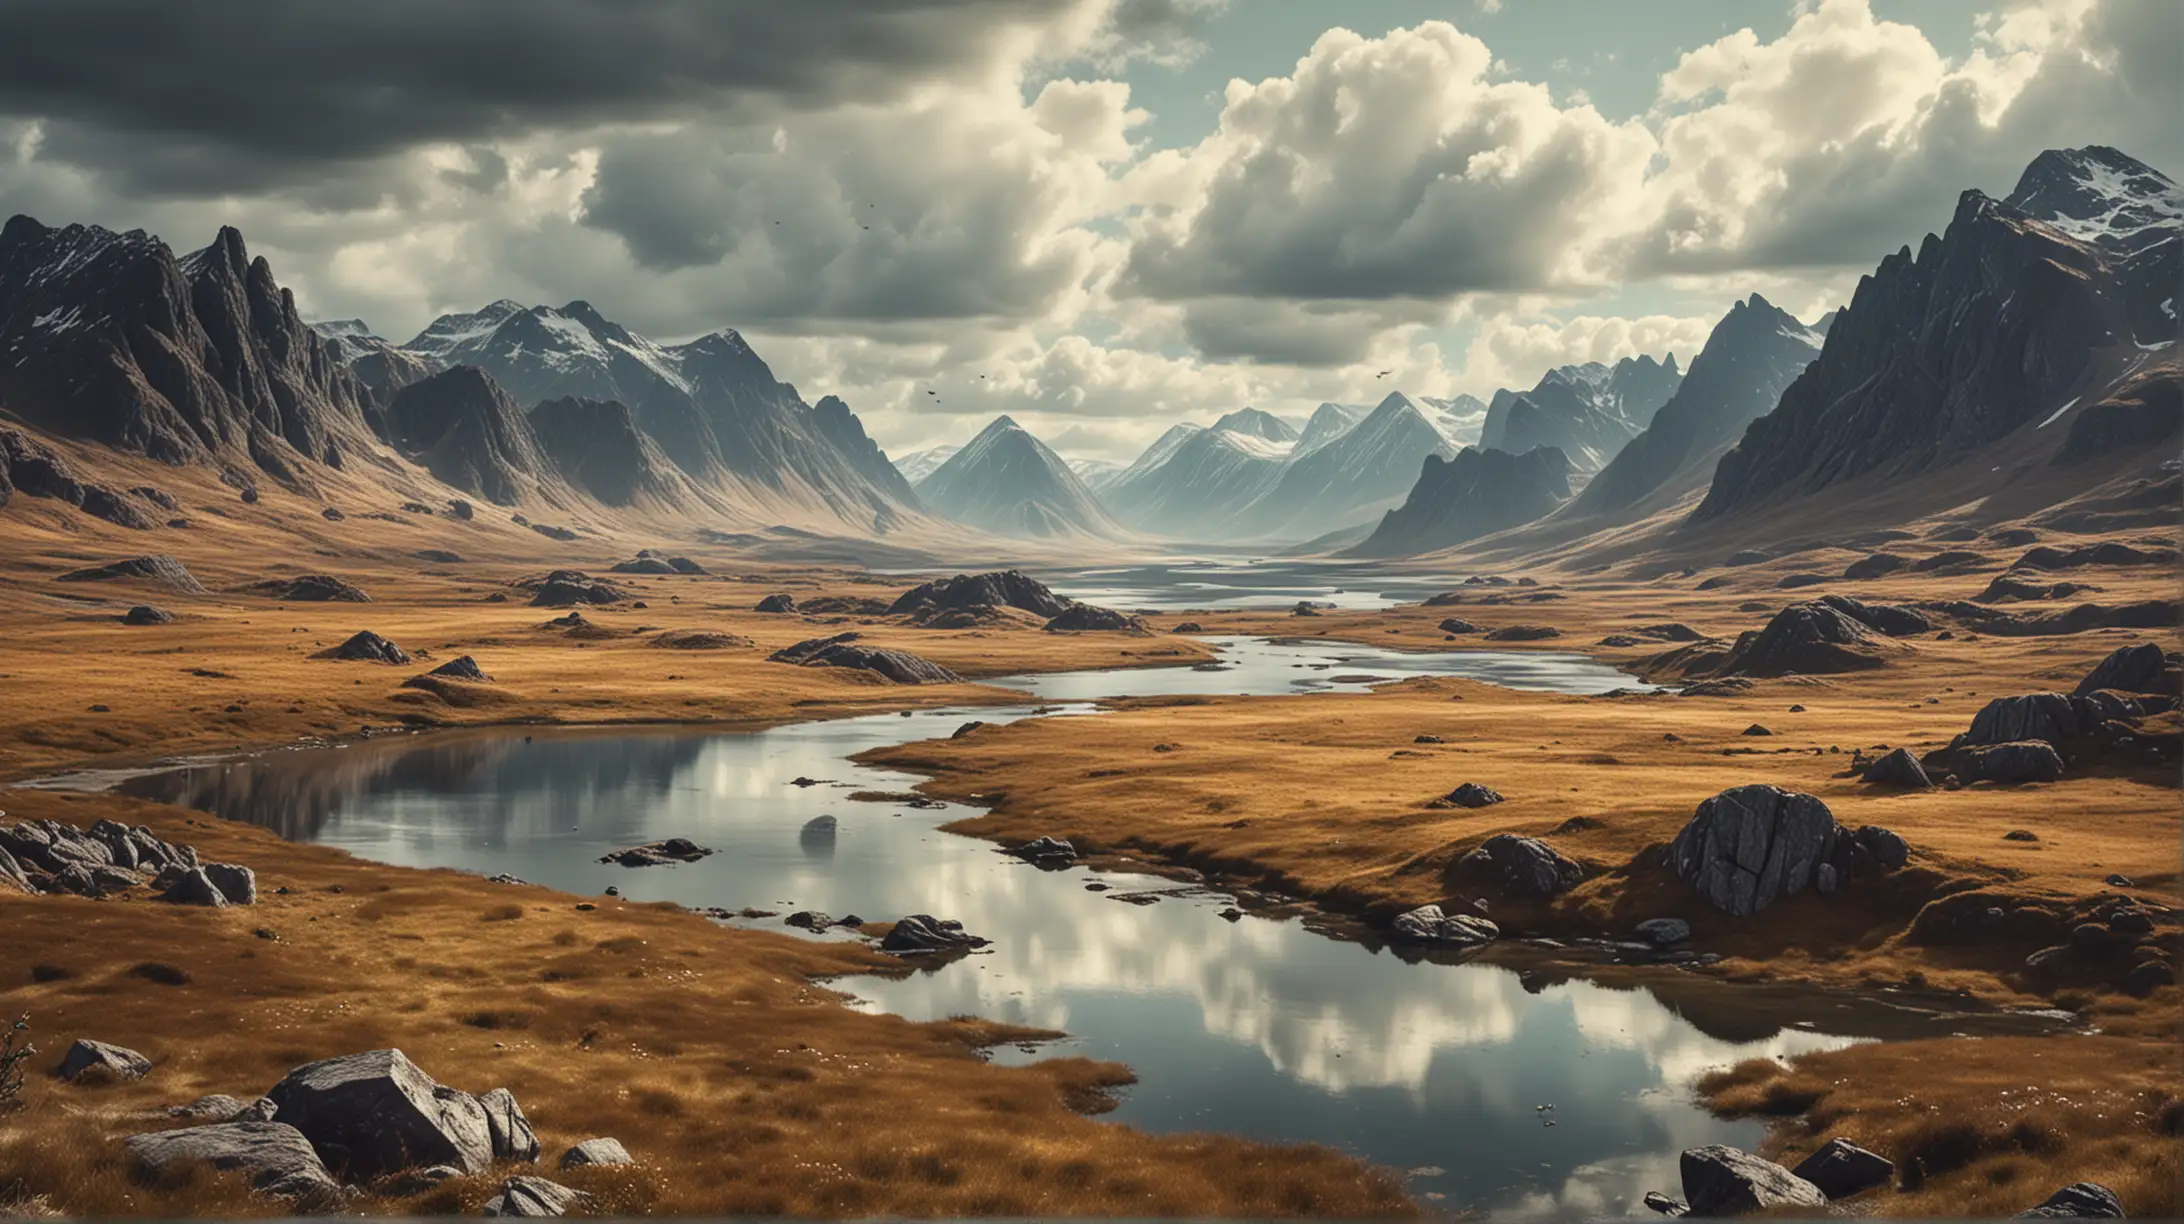 The landscape of a highland, some small steampunk collets, high mountains on the horizon, a little lake in the middle of the landscape, cloudy, bird's eye distant view